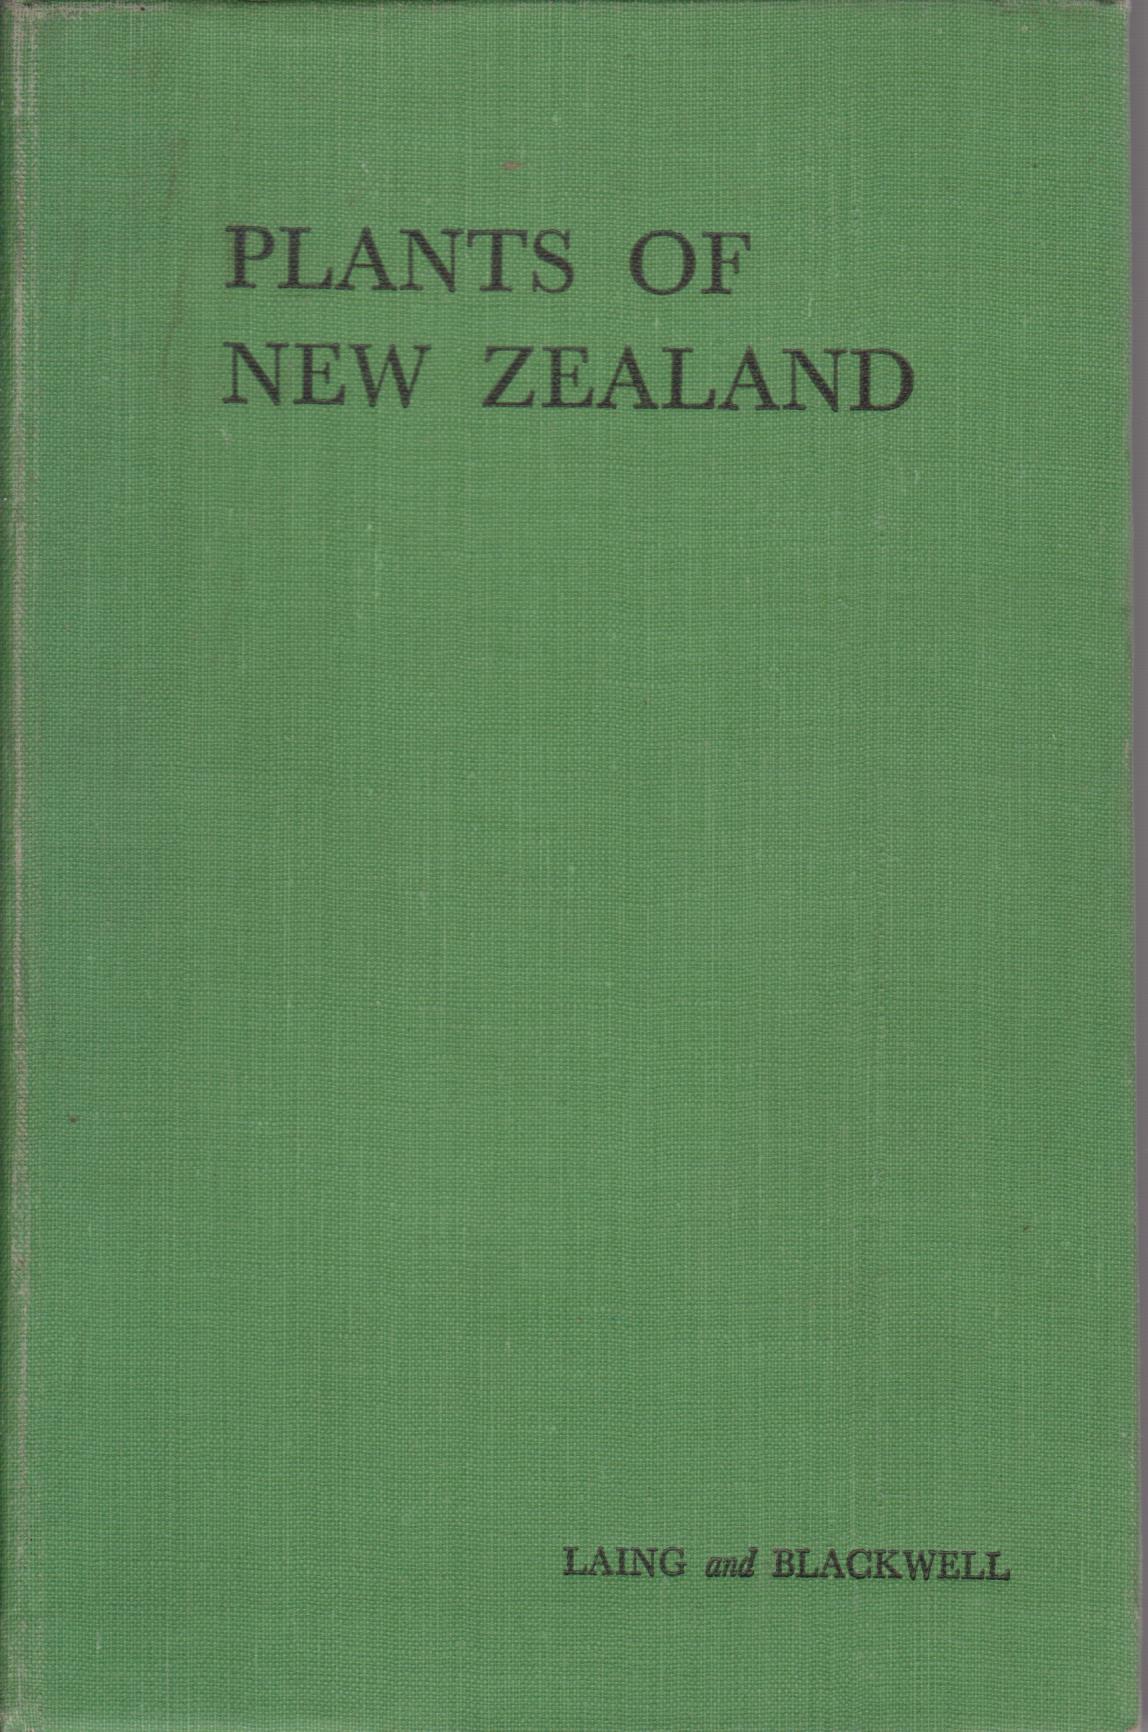 cover image of Plants of New Zealand, for sale in New Zealand 